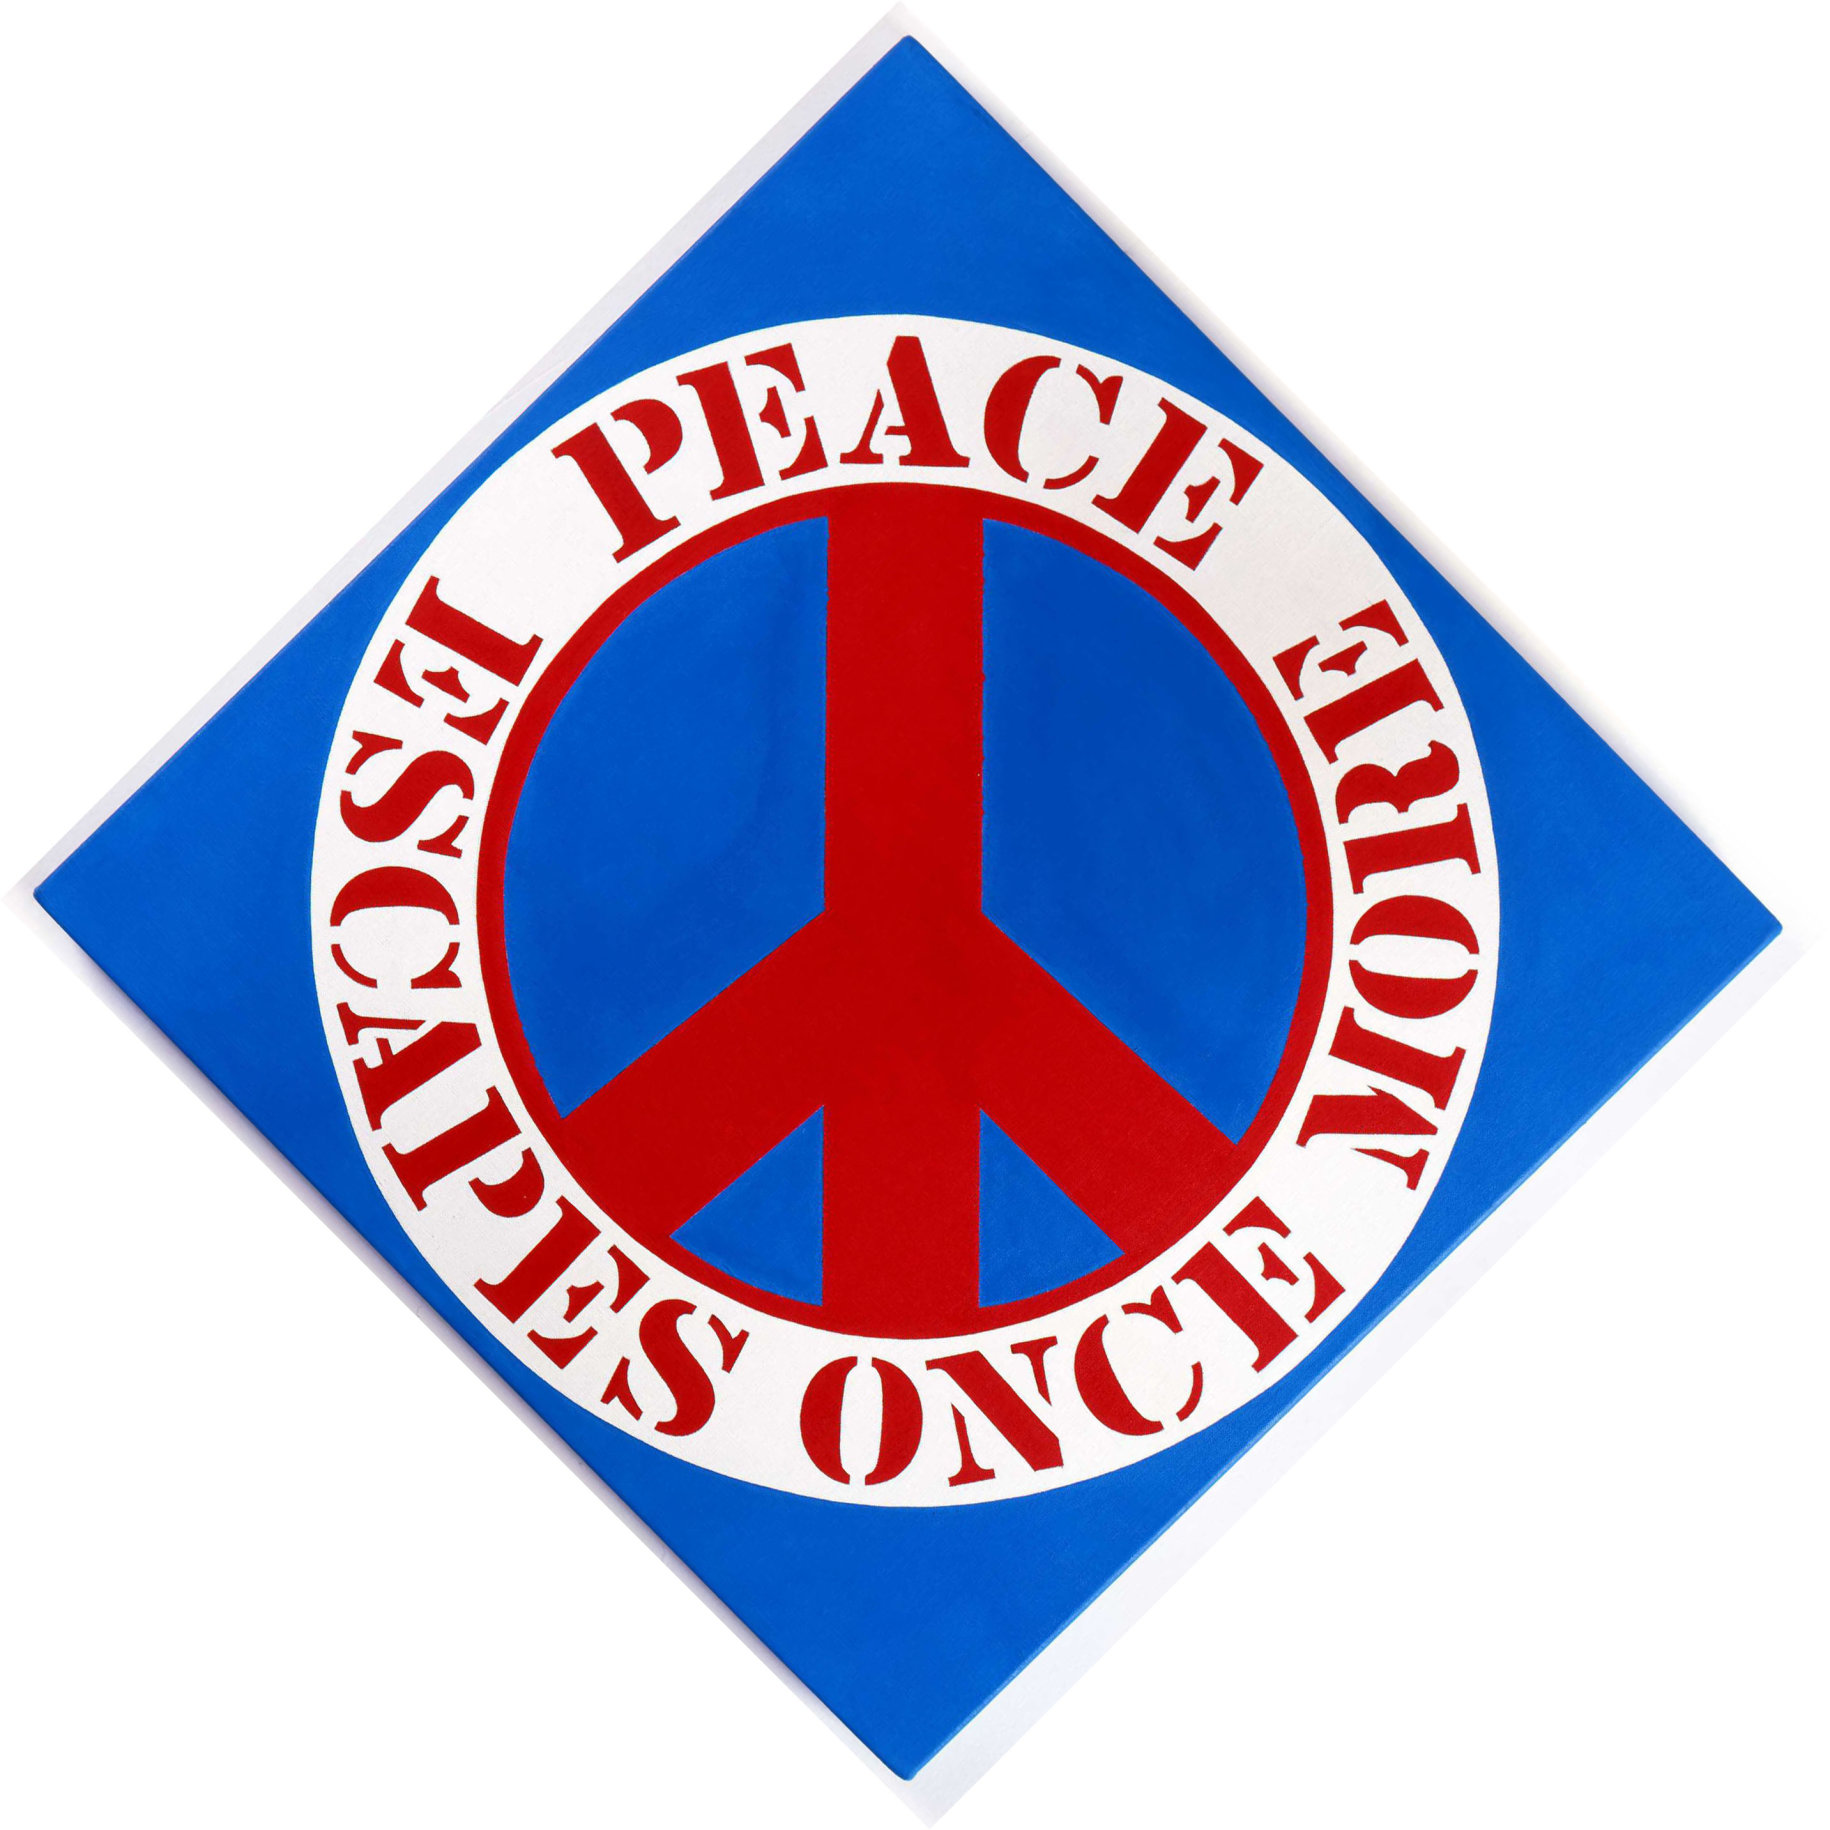 A 34 by 34 inch blue diamond shaped canvas with a red peace sign. Surrounding the peace sign is a white ring with a red inner outline and the painting's title, &quot;Peace Escapes Once More&quot; painted in red letters. &quot;Peace&quot; appears in the top of the ring and &quot;Escapes Once More&quot; in the bottom half.